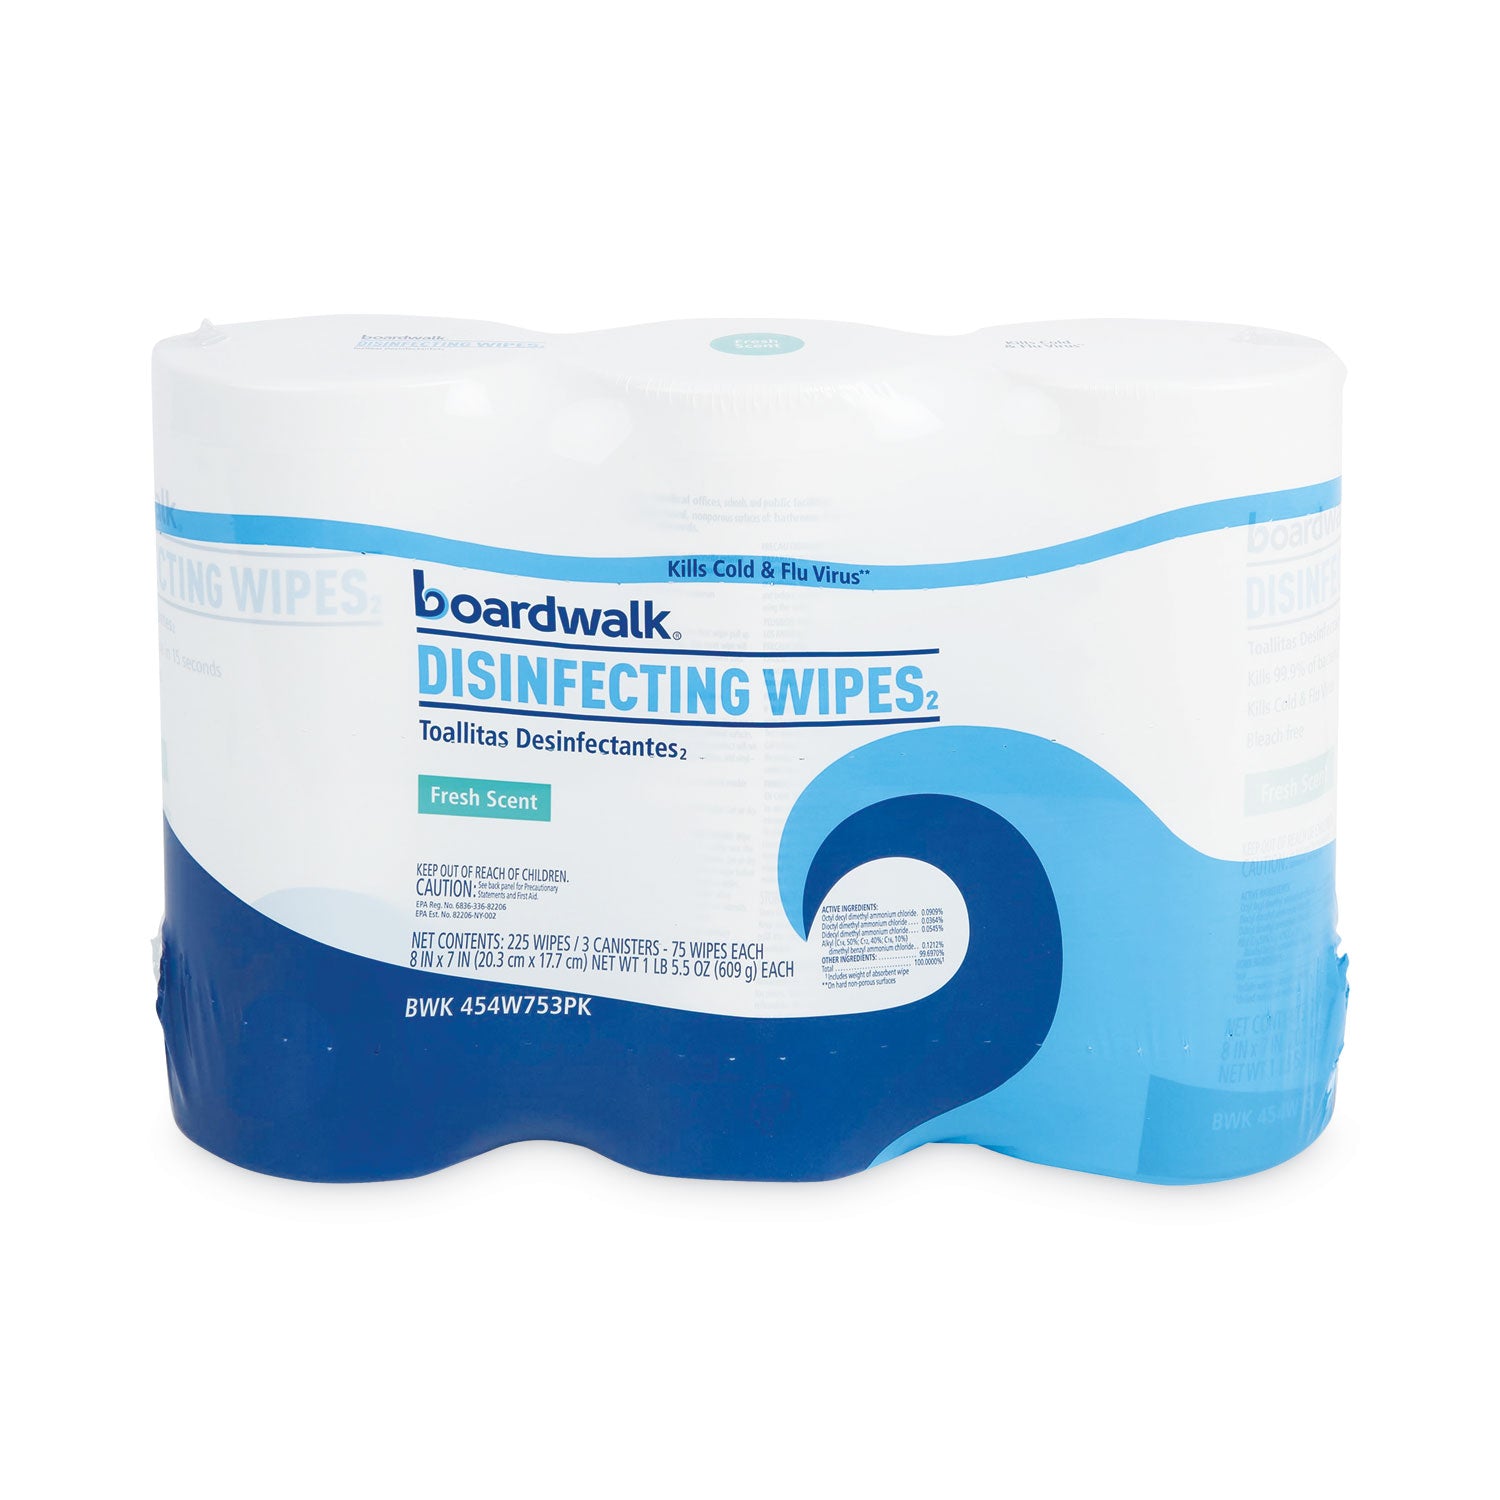 disinfecting-wipes-7-x-8-fresh-scent-75-canister-3-canisters-pack_bwk454w753pk - 1